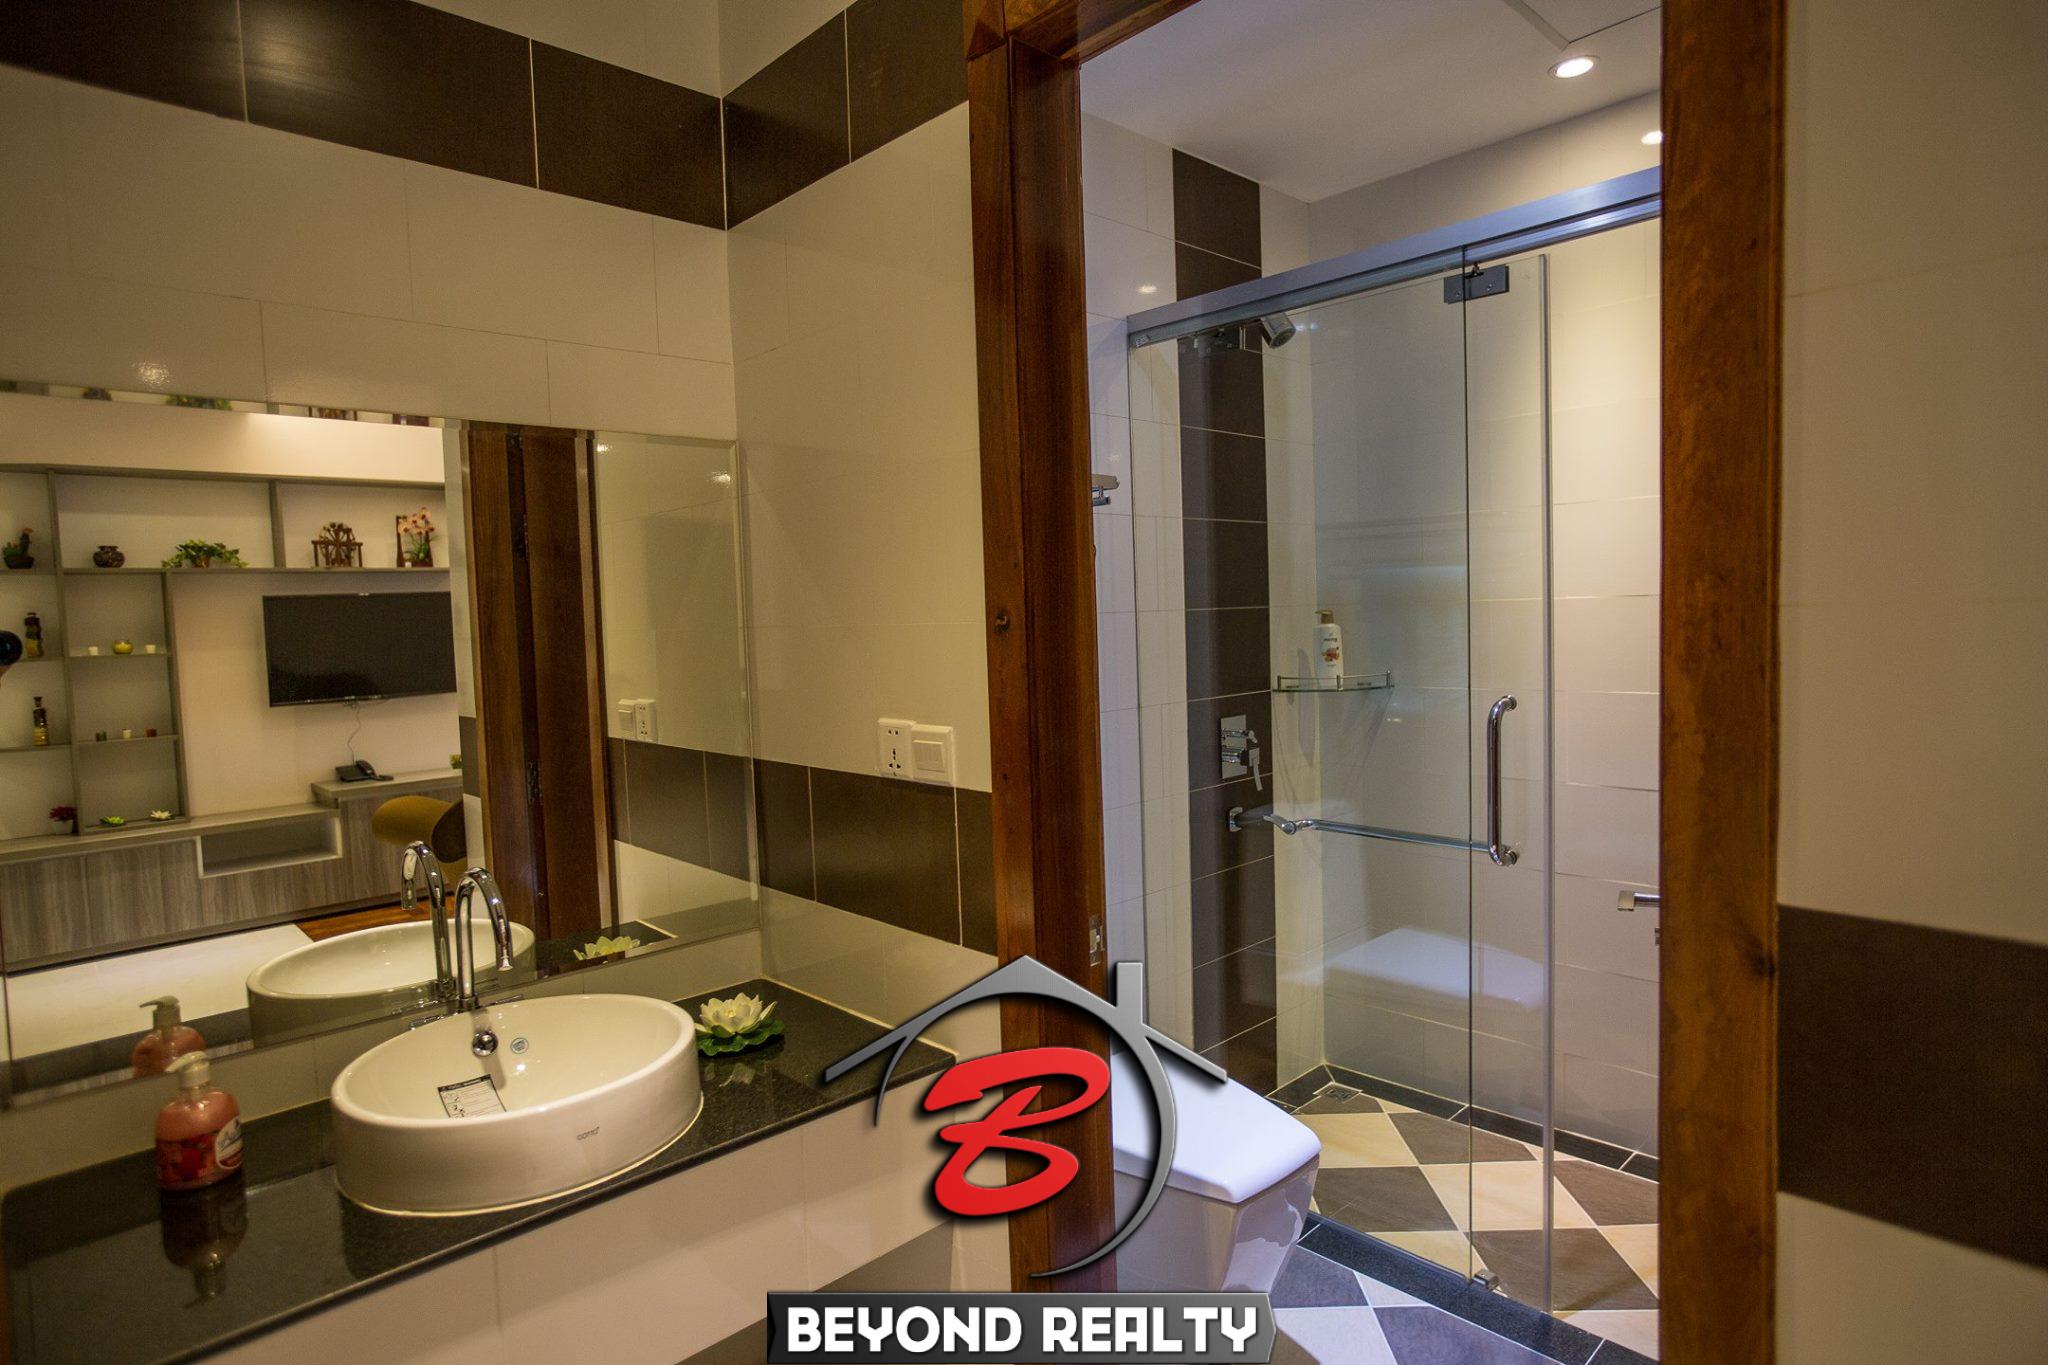 a bathroom of the 2br luxury apartment for rent in Bkk1 Phnom Penh Cambodia